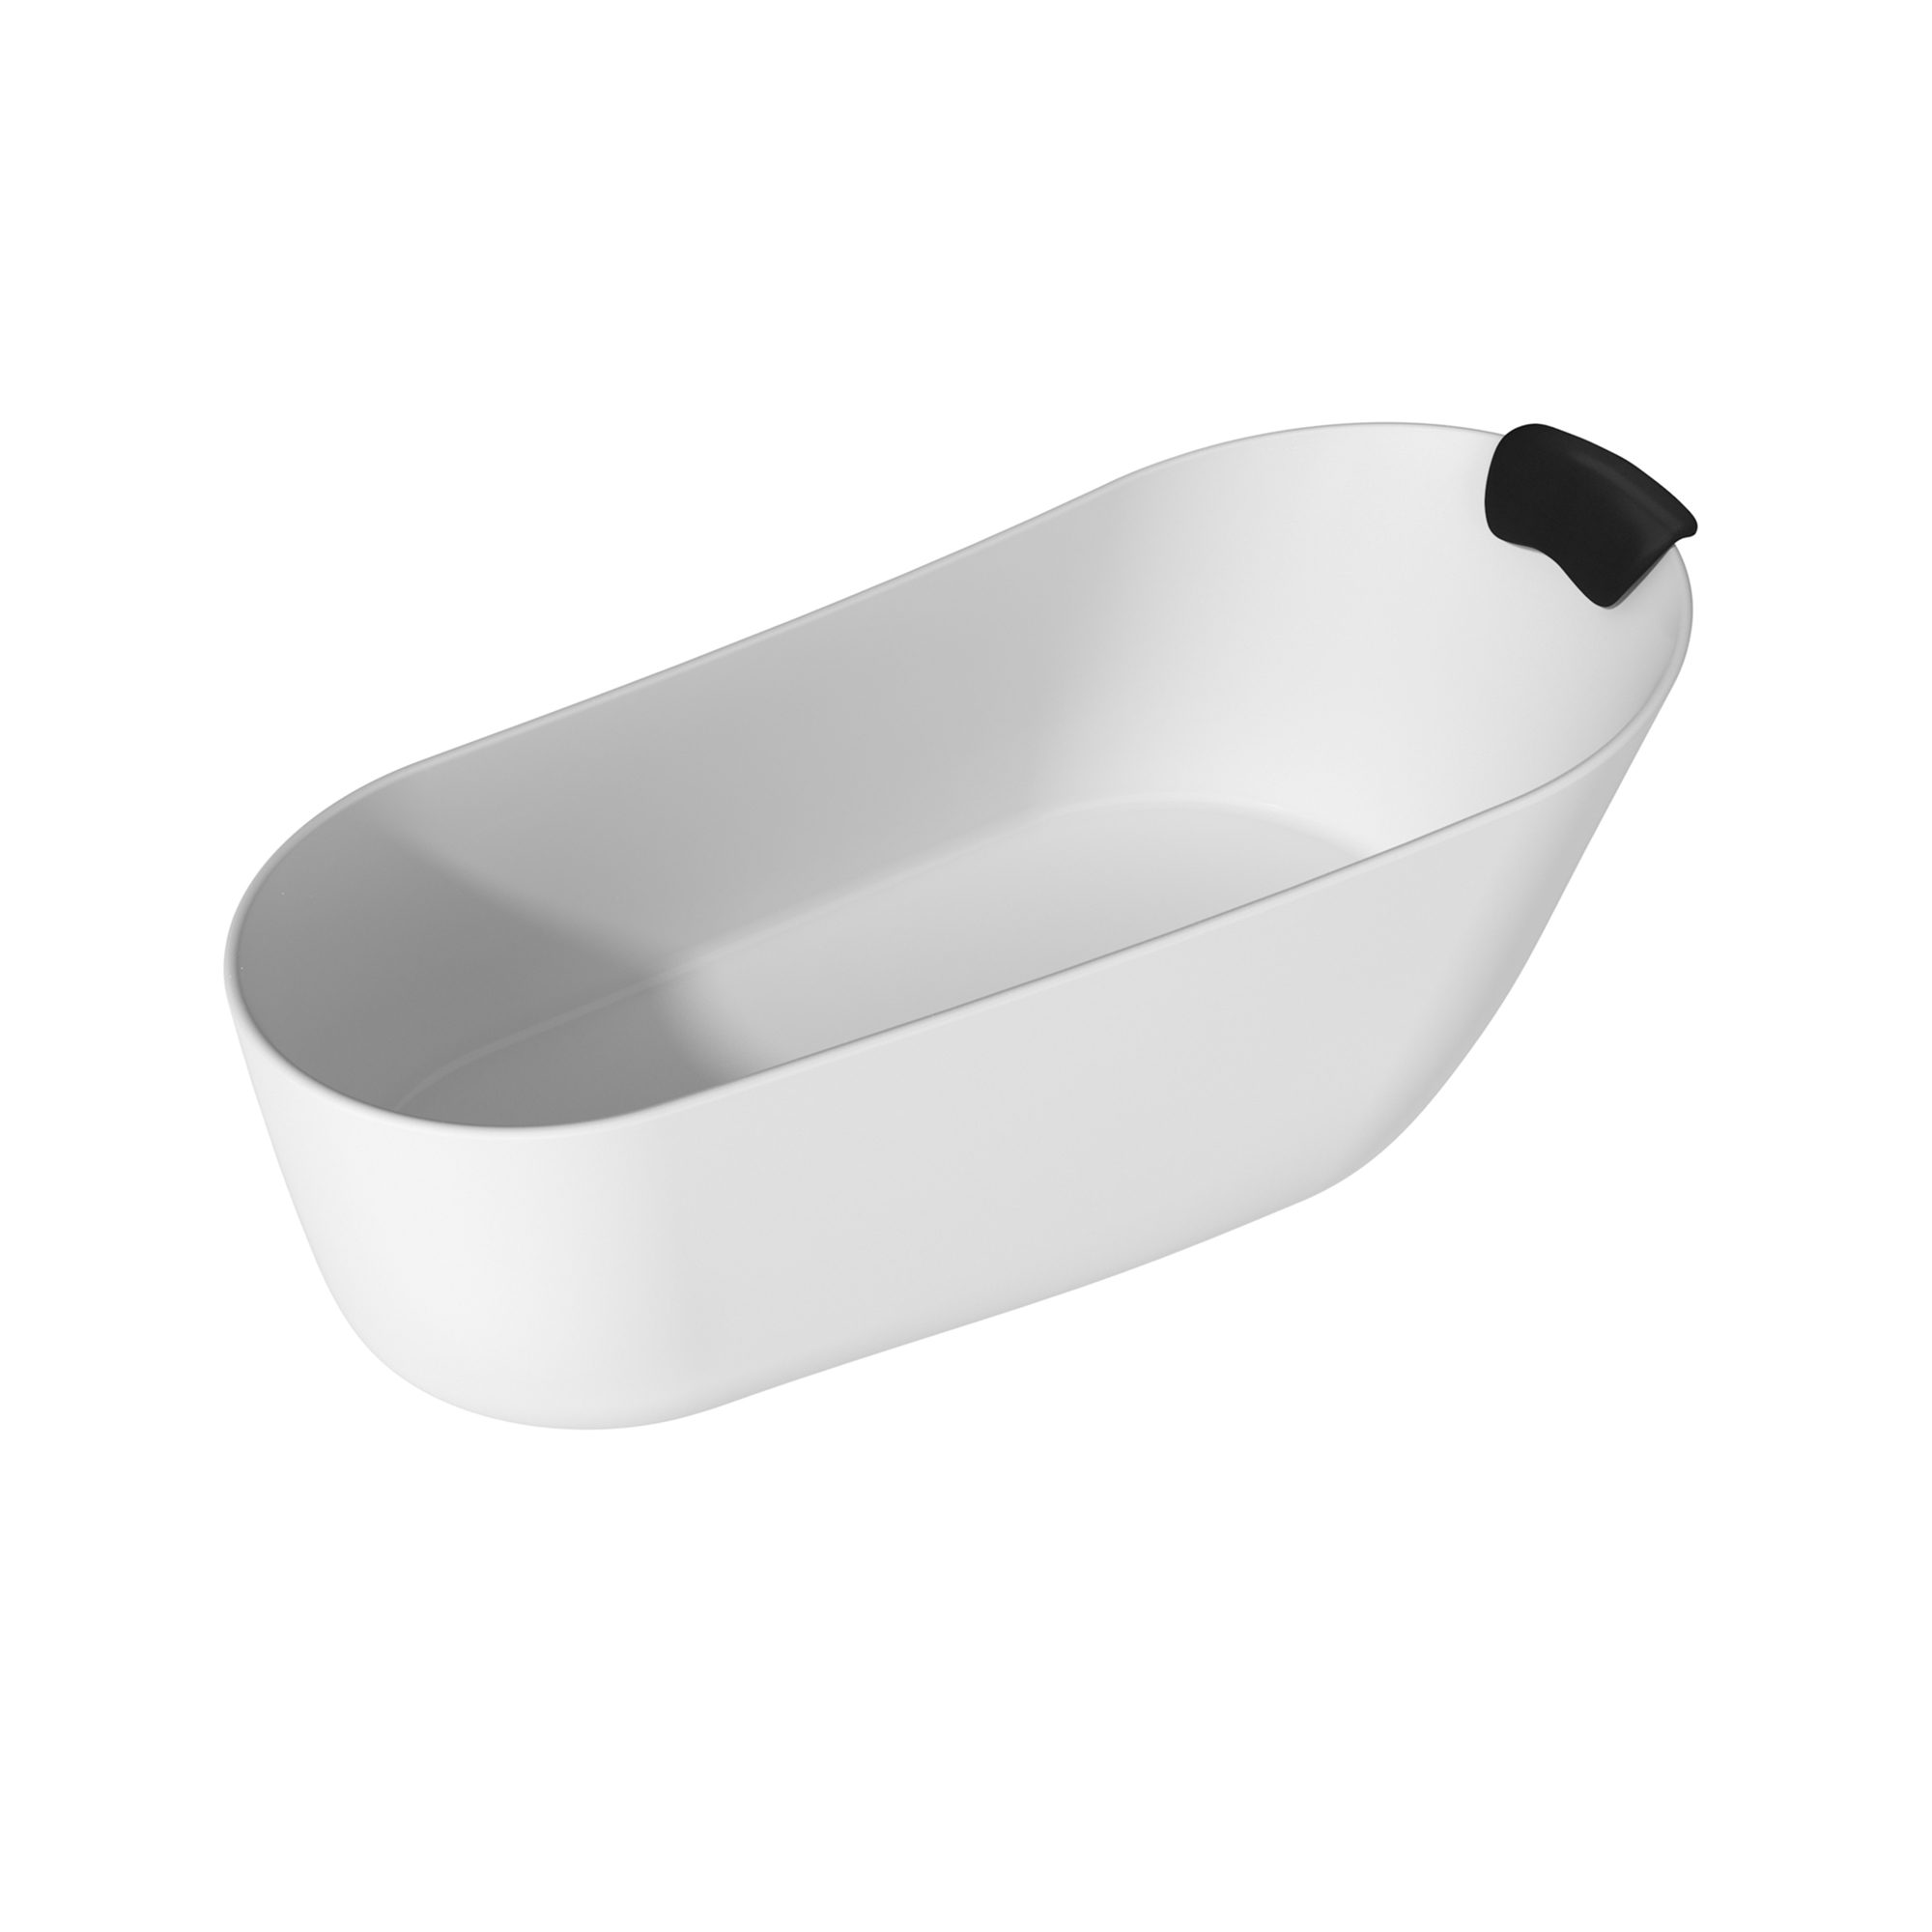 59/67" Matte Color Tubs Stone Resin Bathtubs, Adult Freestanding Tub with Cushions, Classic Stand-Alone Elegance, Durable and Easy to Maintain, with Free to Ship and Varied Length Options